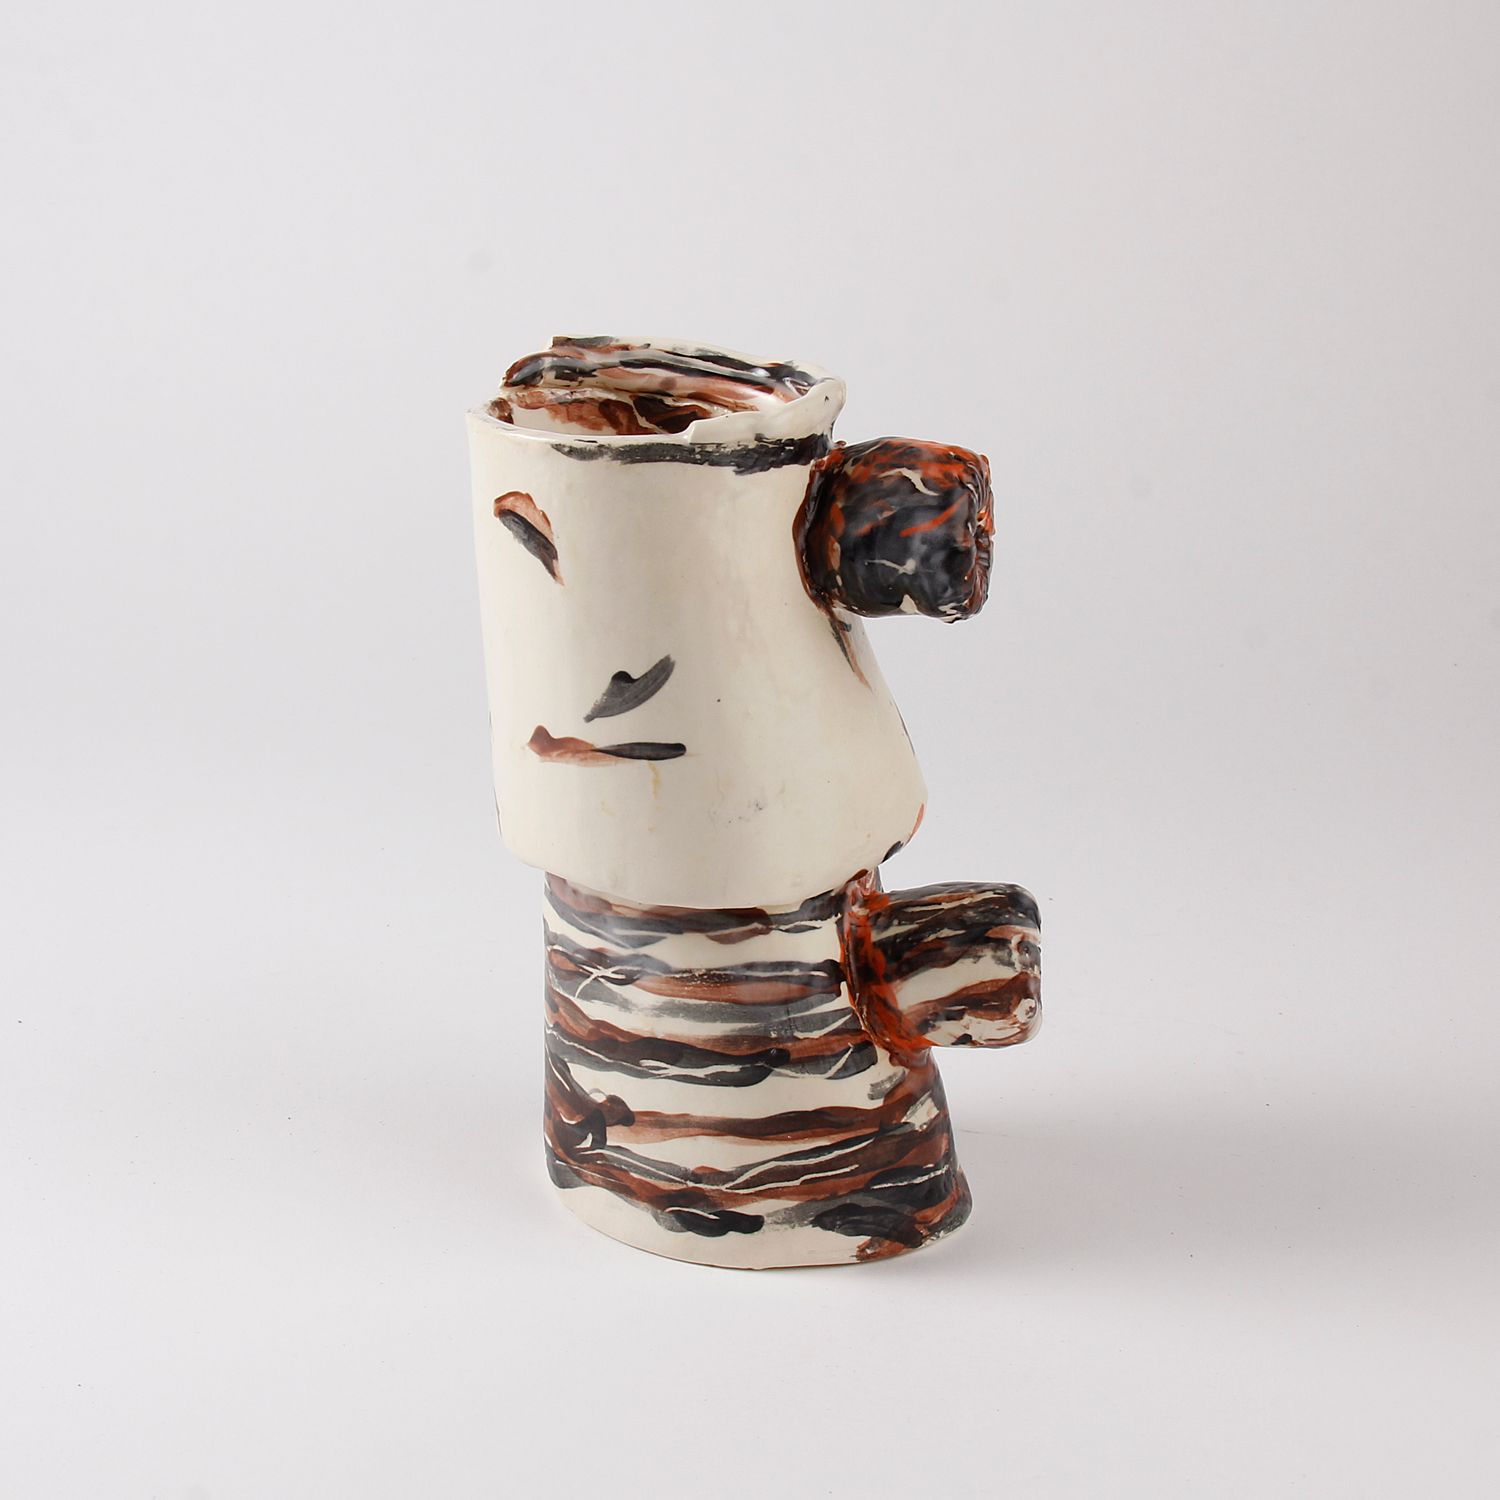 Patricia Lazar: Tall Vessel Product Image 1 of 2